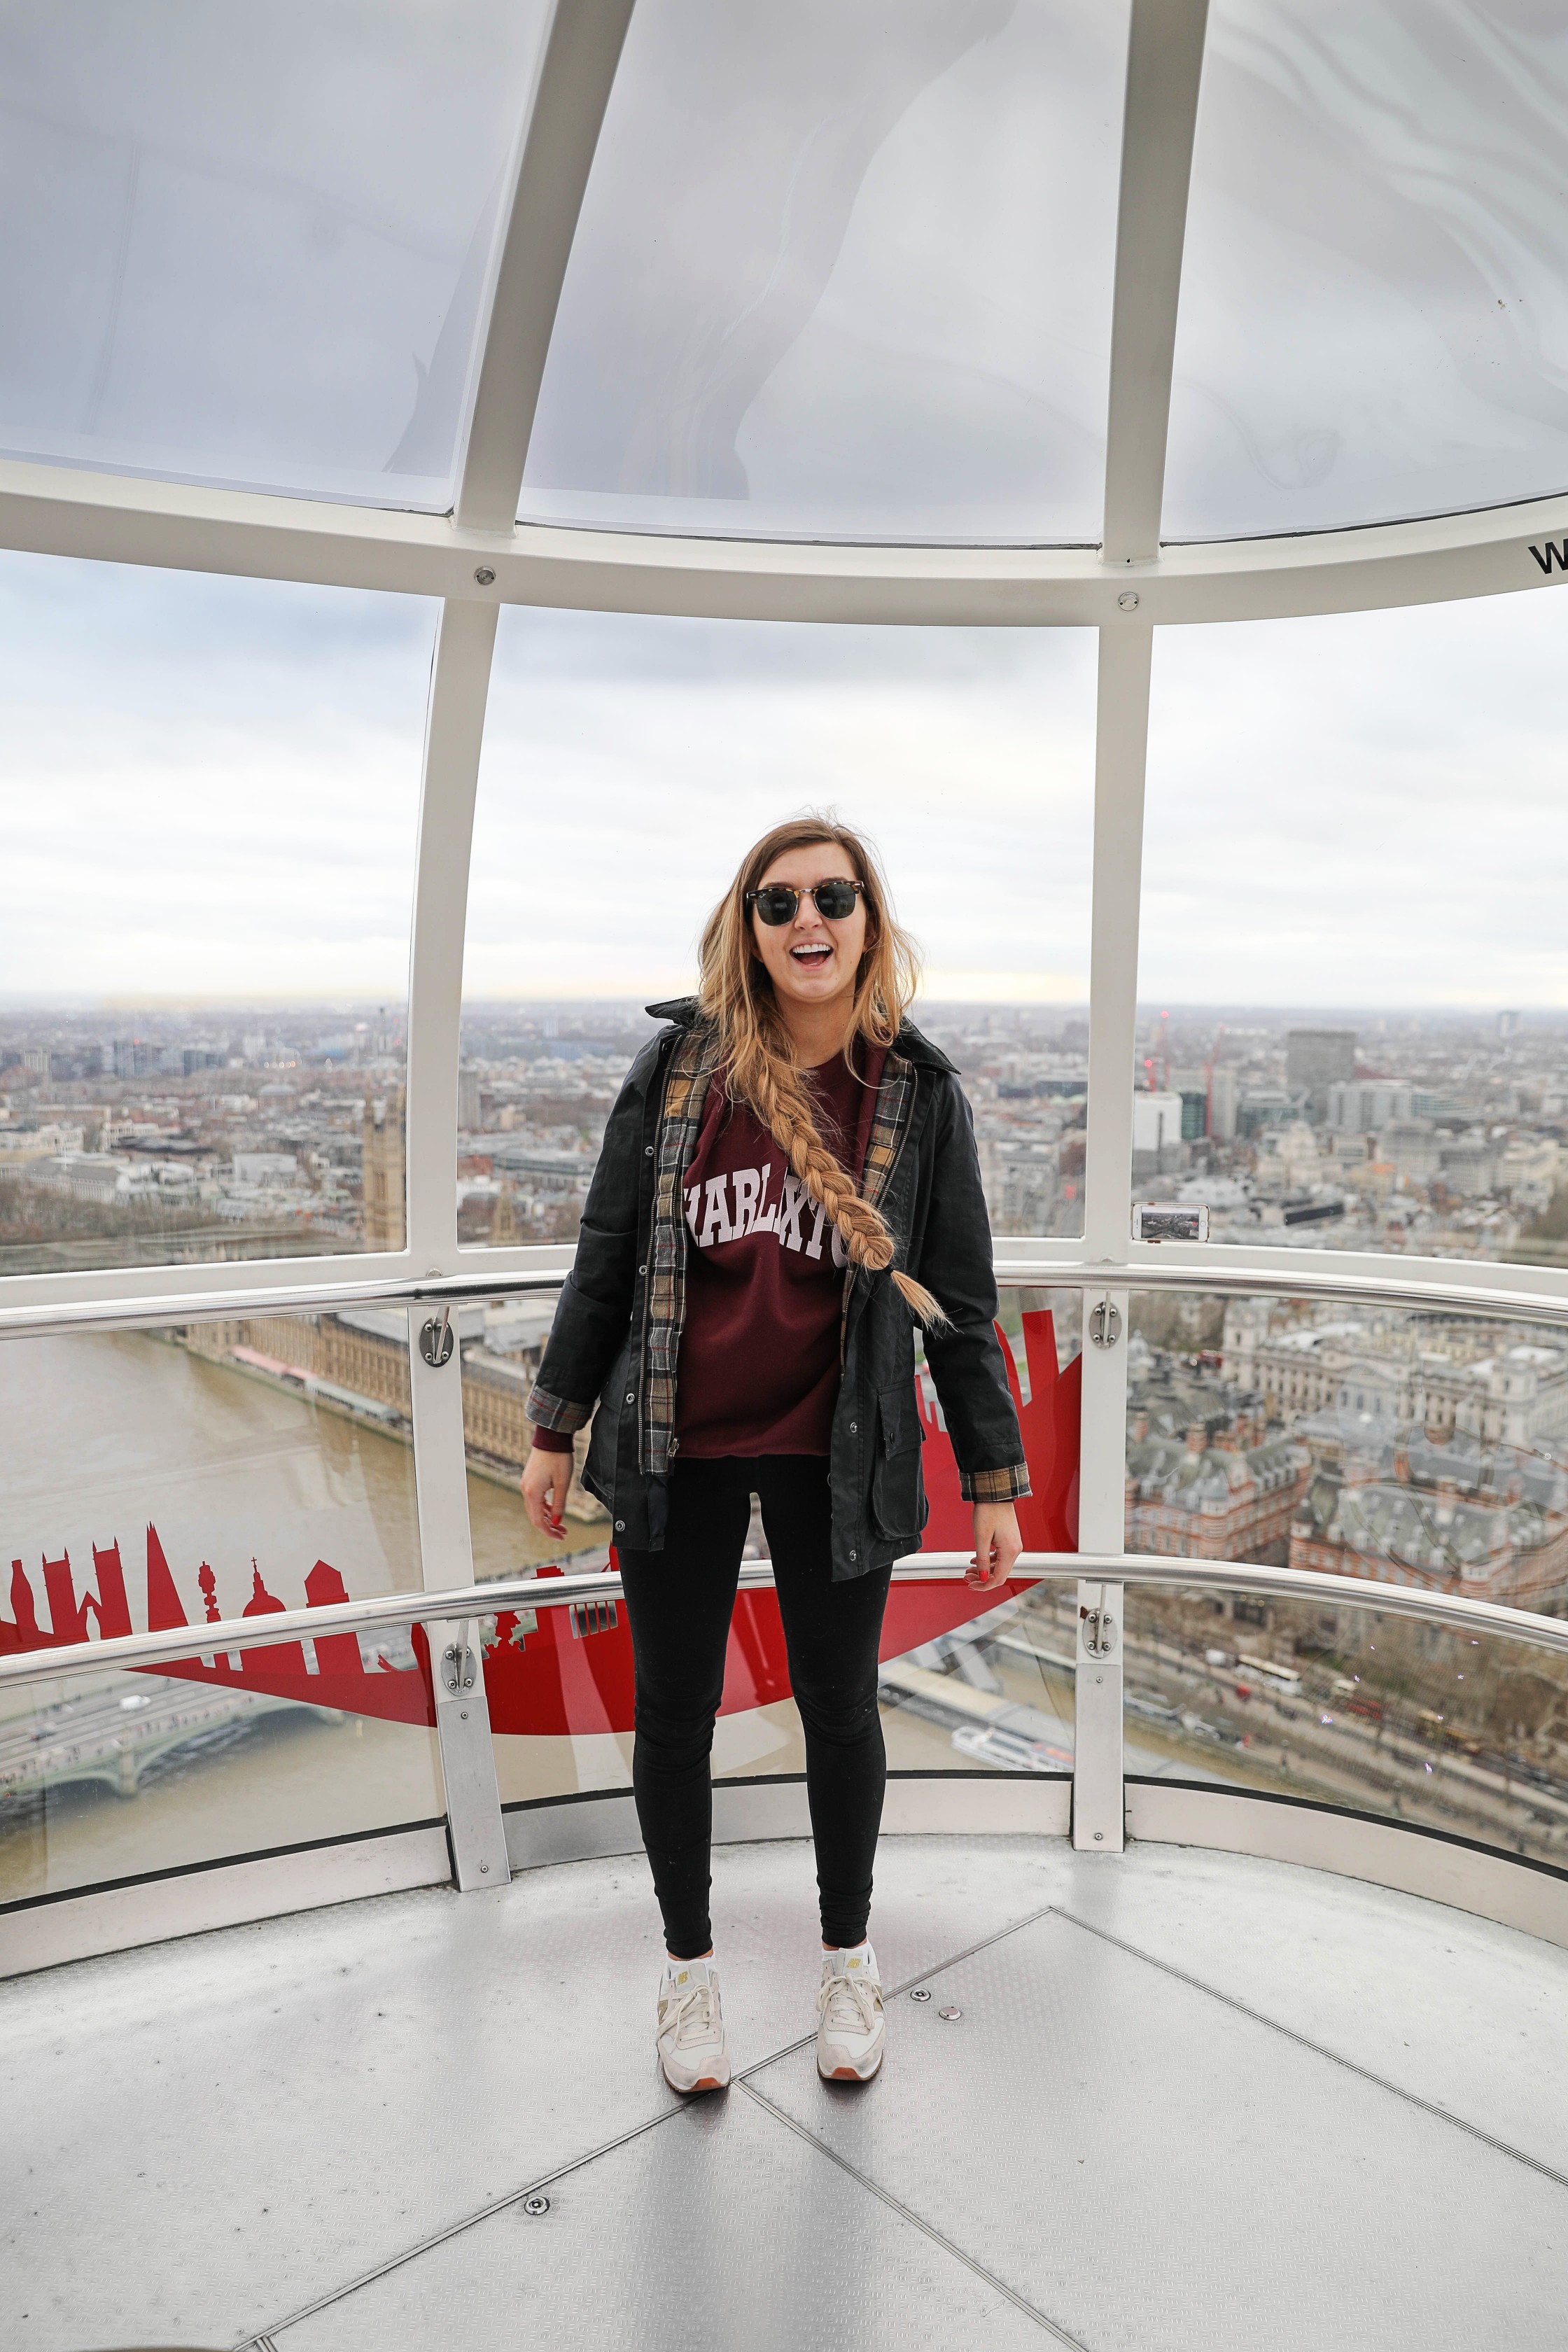 London Adventure post! Photos from the London Eye! Wearing a Barbour coat and England crewneck with my favorite gold sneakers by new balance! By Lauren Lindmark on daily dose of charm dailydoseofcharm.com